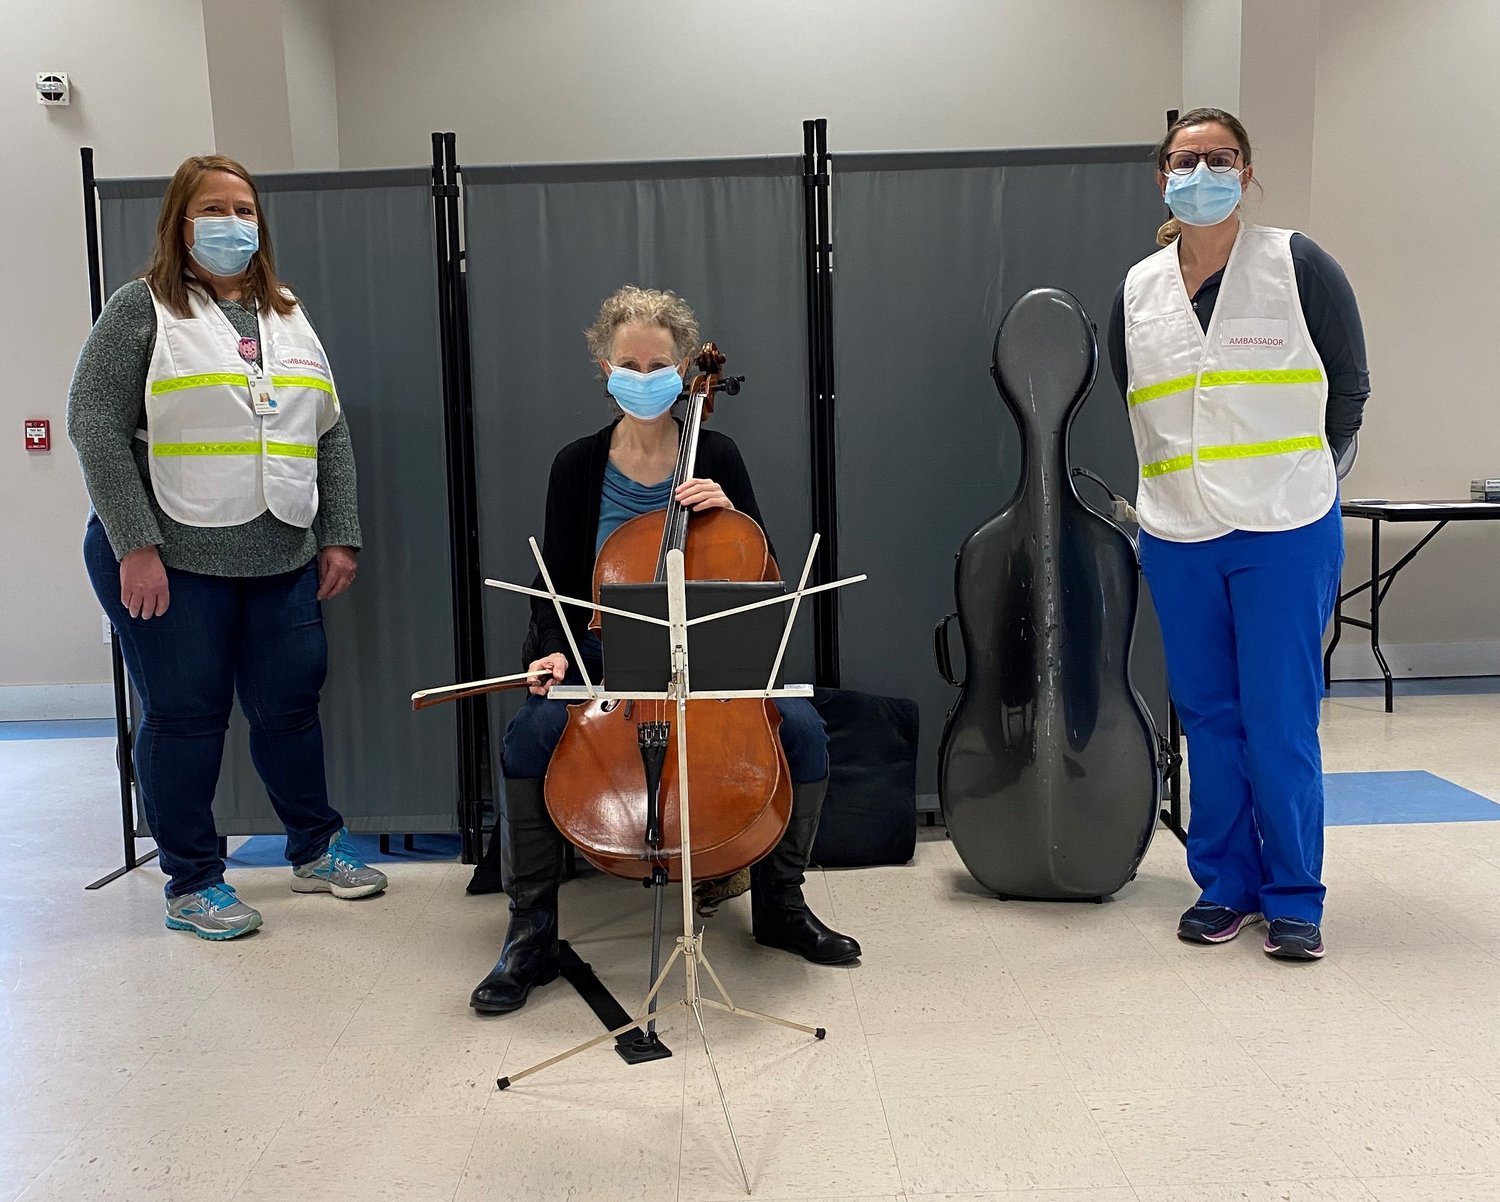 Cellist Mollie Glazer with Nantucket Cottage Hospital staff members Michele Cranston and Suzanne Carroll at the New South Road VFW vaccination site March 1.